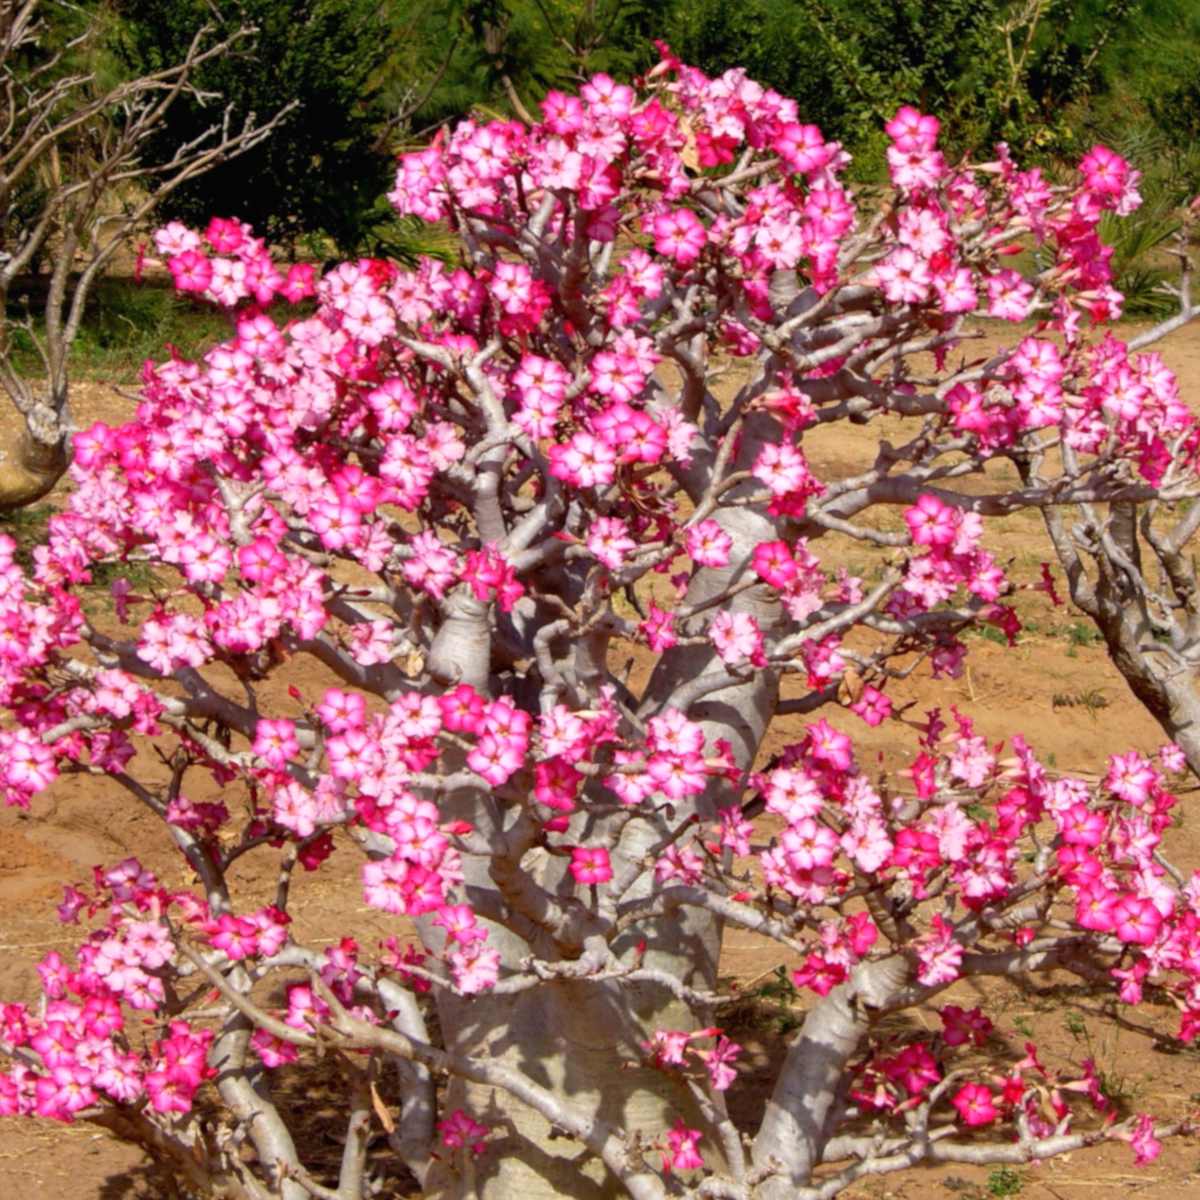 Adenium Or Desert Rose Tips On Caring For It,Tiny Homes On Wheels For Sale Under 10 000